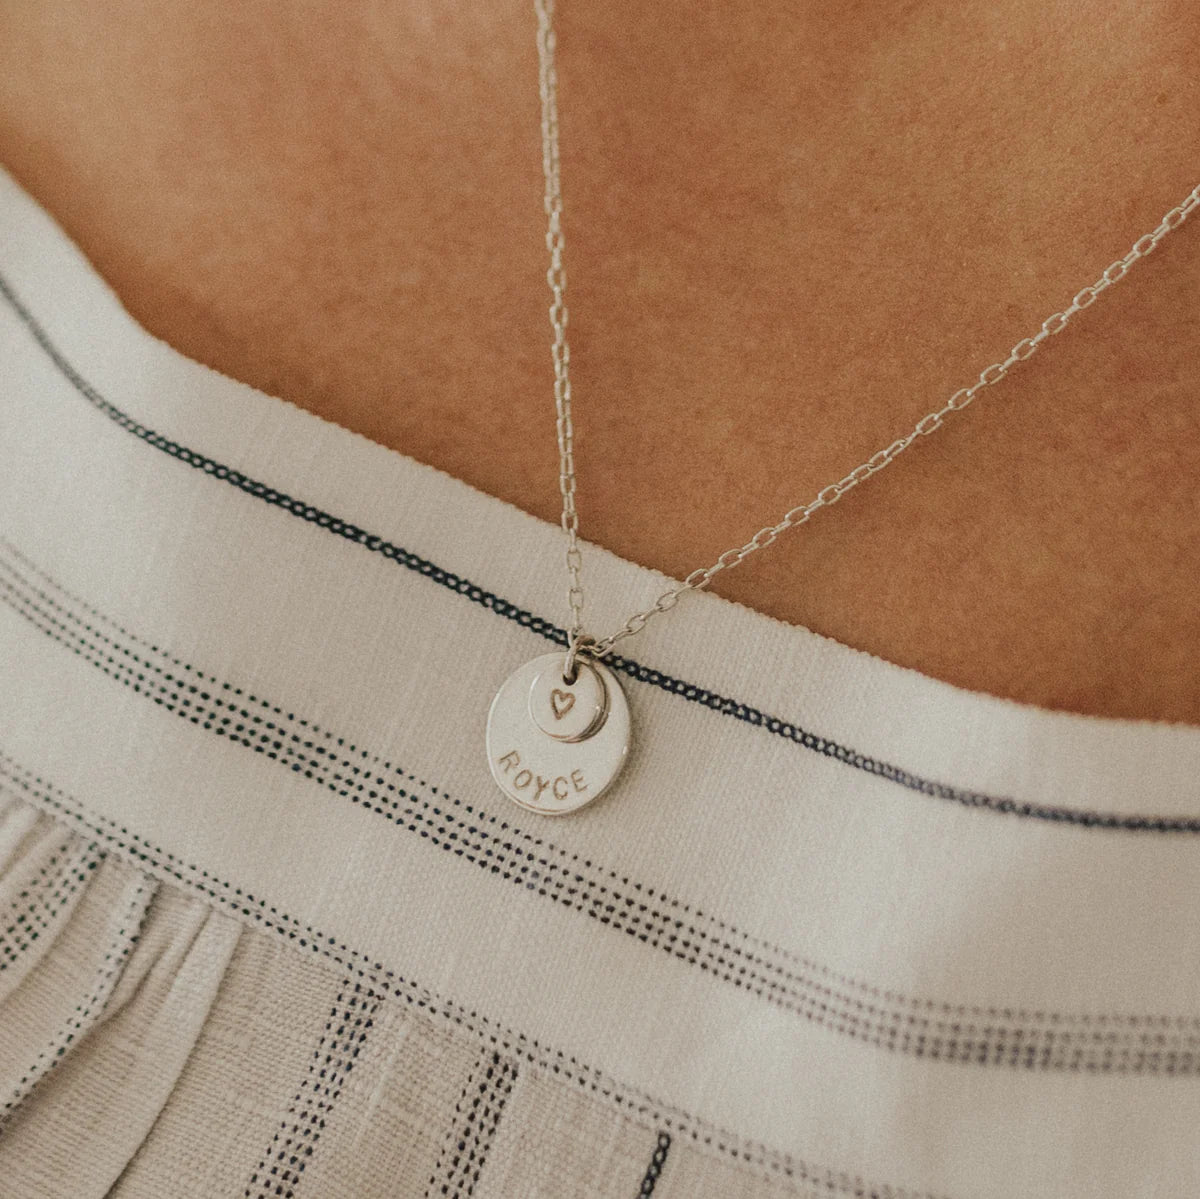 Eternity Circle Necklace, Mixed Metal Linked Circle Necklace, Gold and  Silver Interlocking Circles, Double Circle, Minimalist Jewelry - Etsy